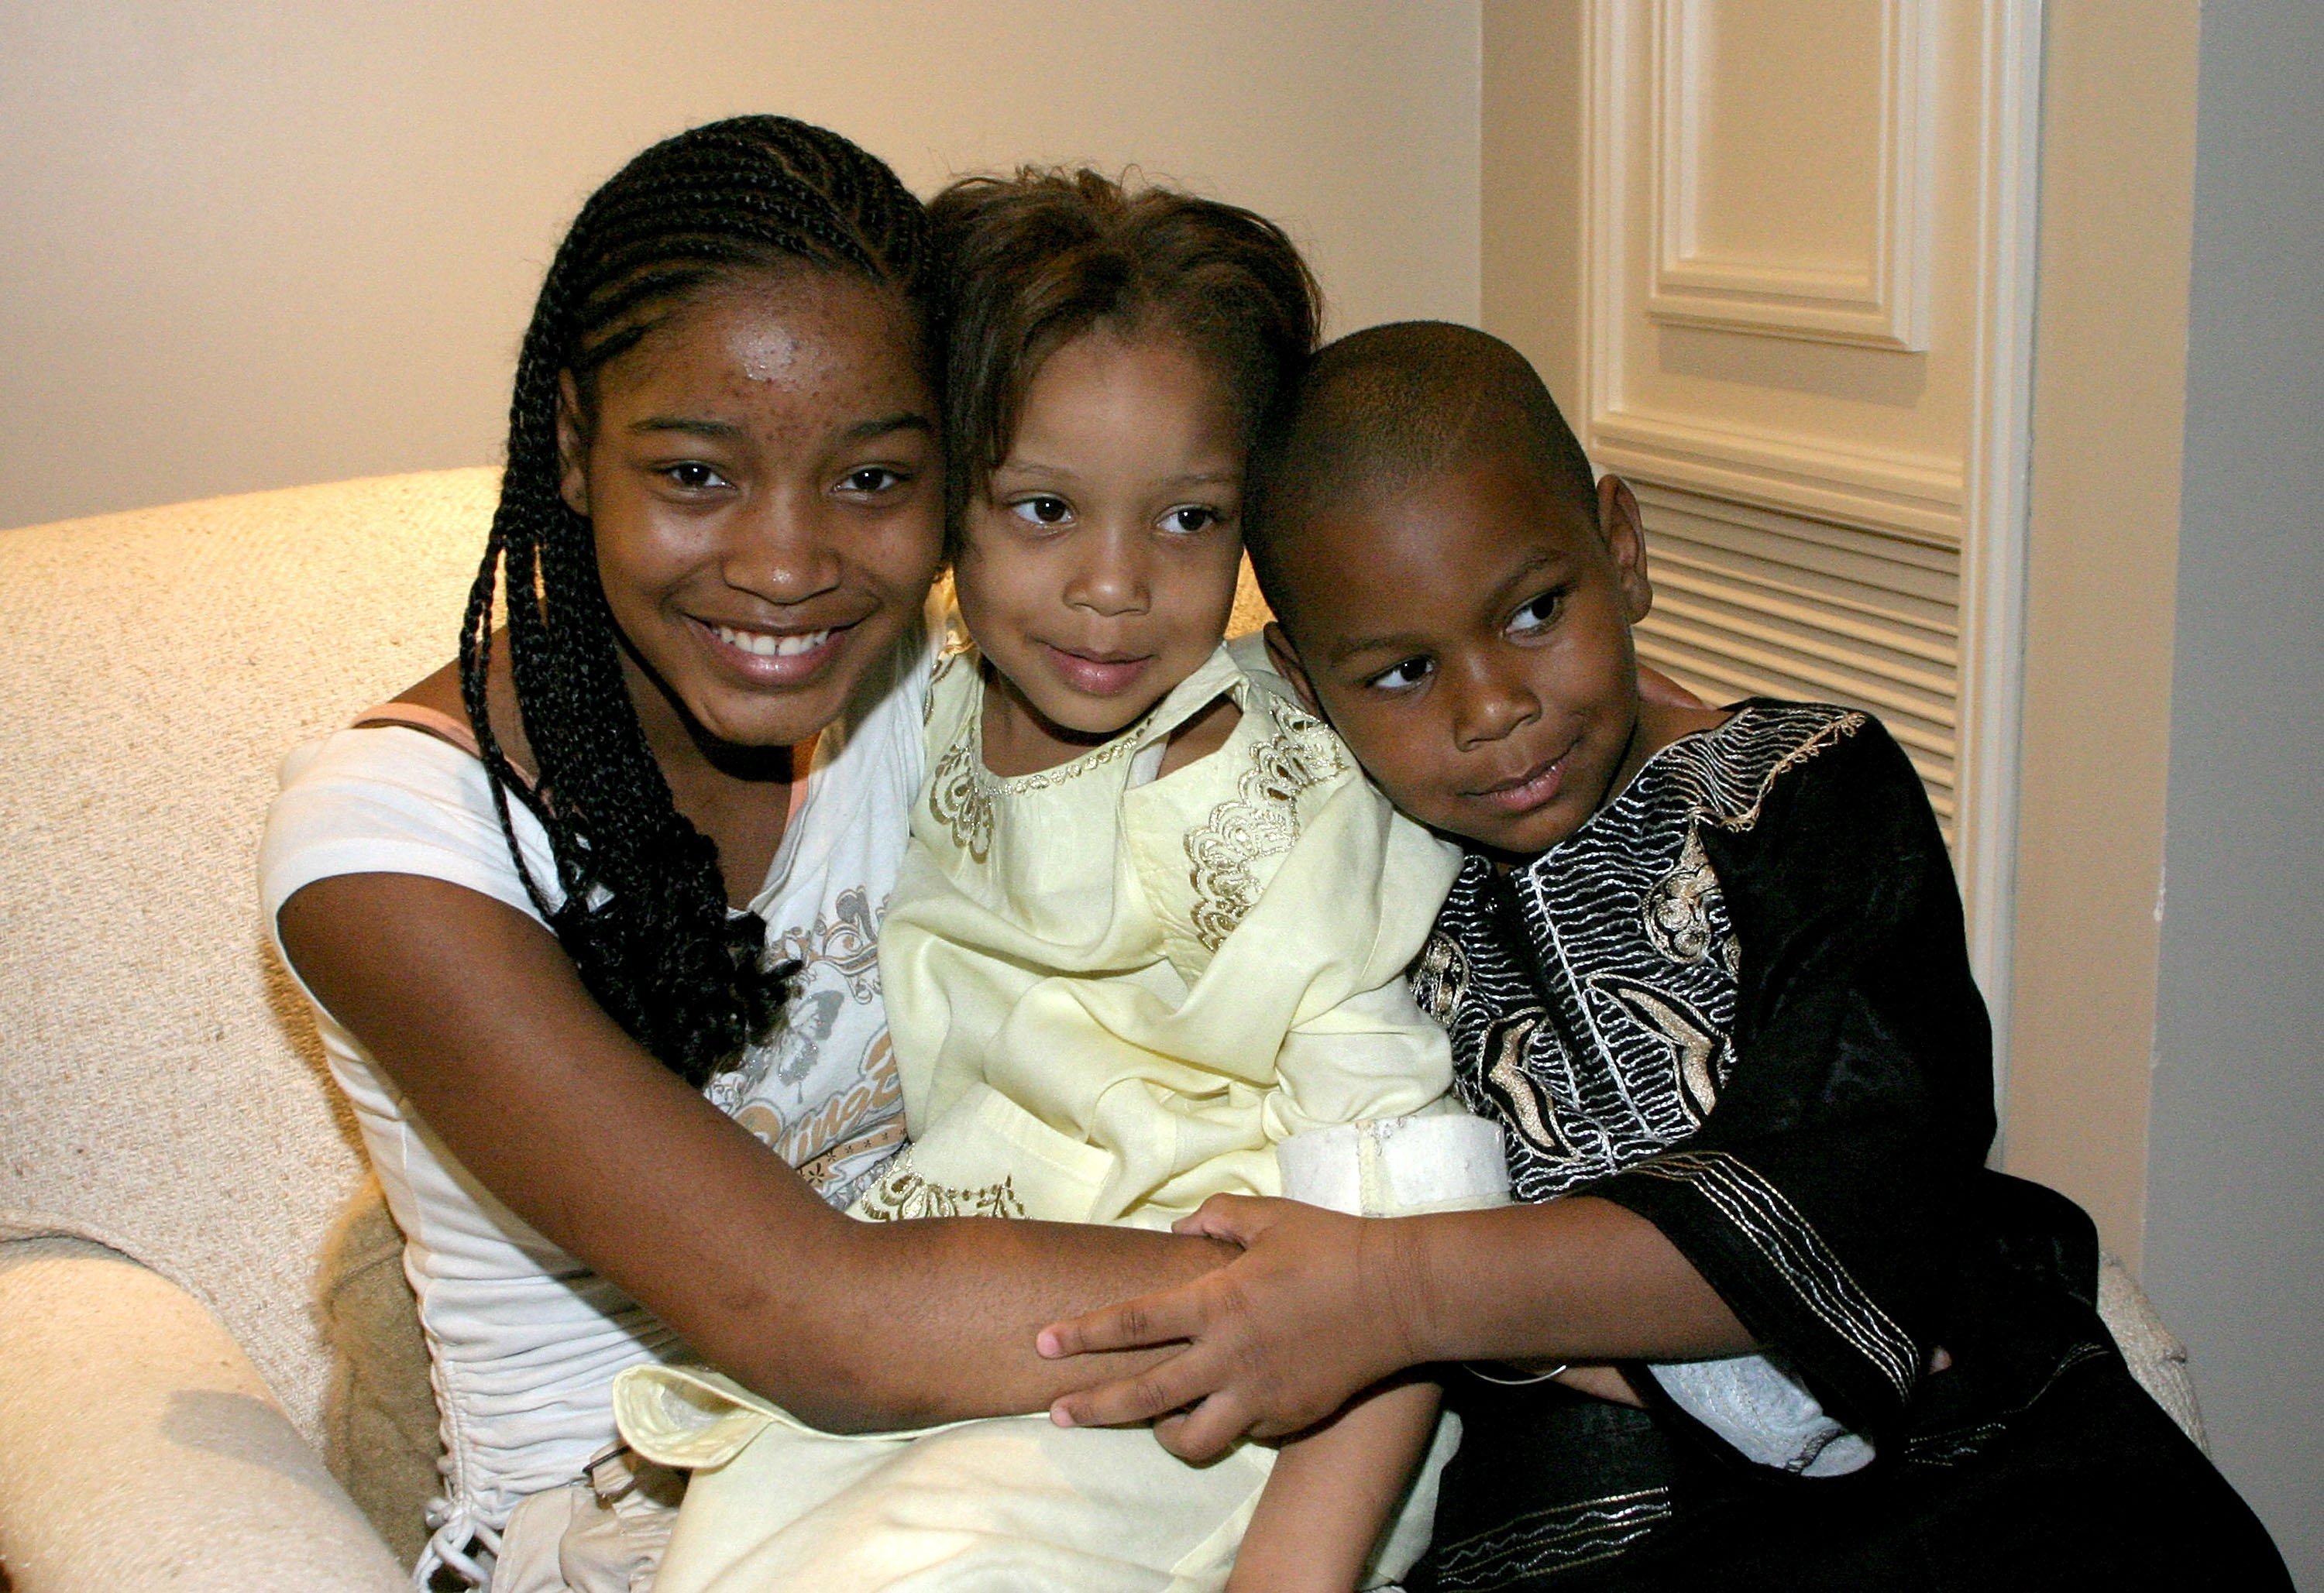 Keke Palmer with her twin siblings Lawrencia and Lawrence Palmer at Lions Gate Films' cocktail reception for the film "Akeelah and the Bee" during ShoWest on March 14, 2006, in Las Vegas, Nevada | Sources: Getty Images